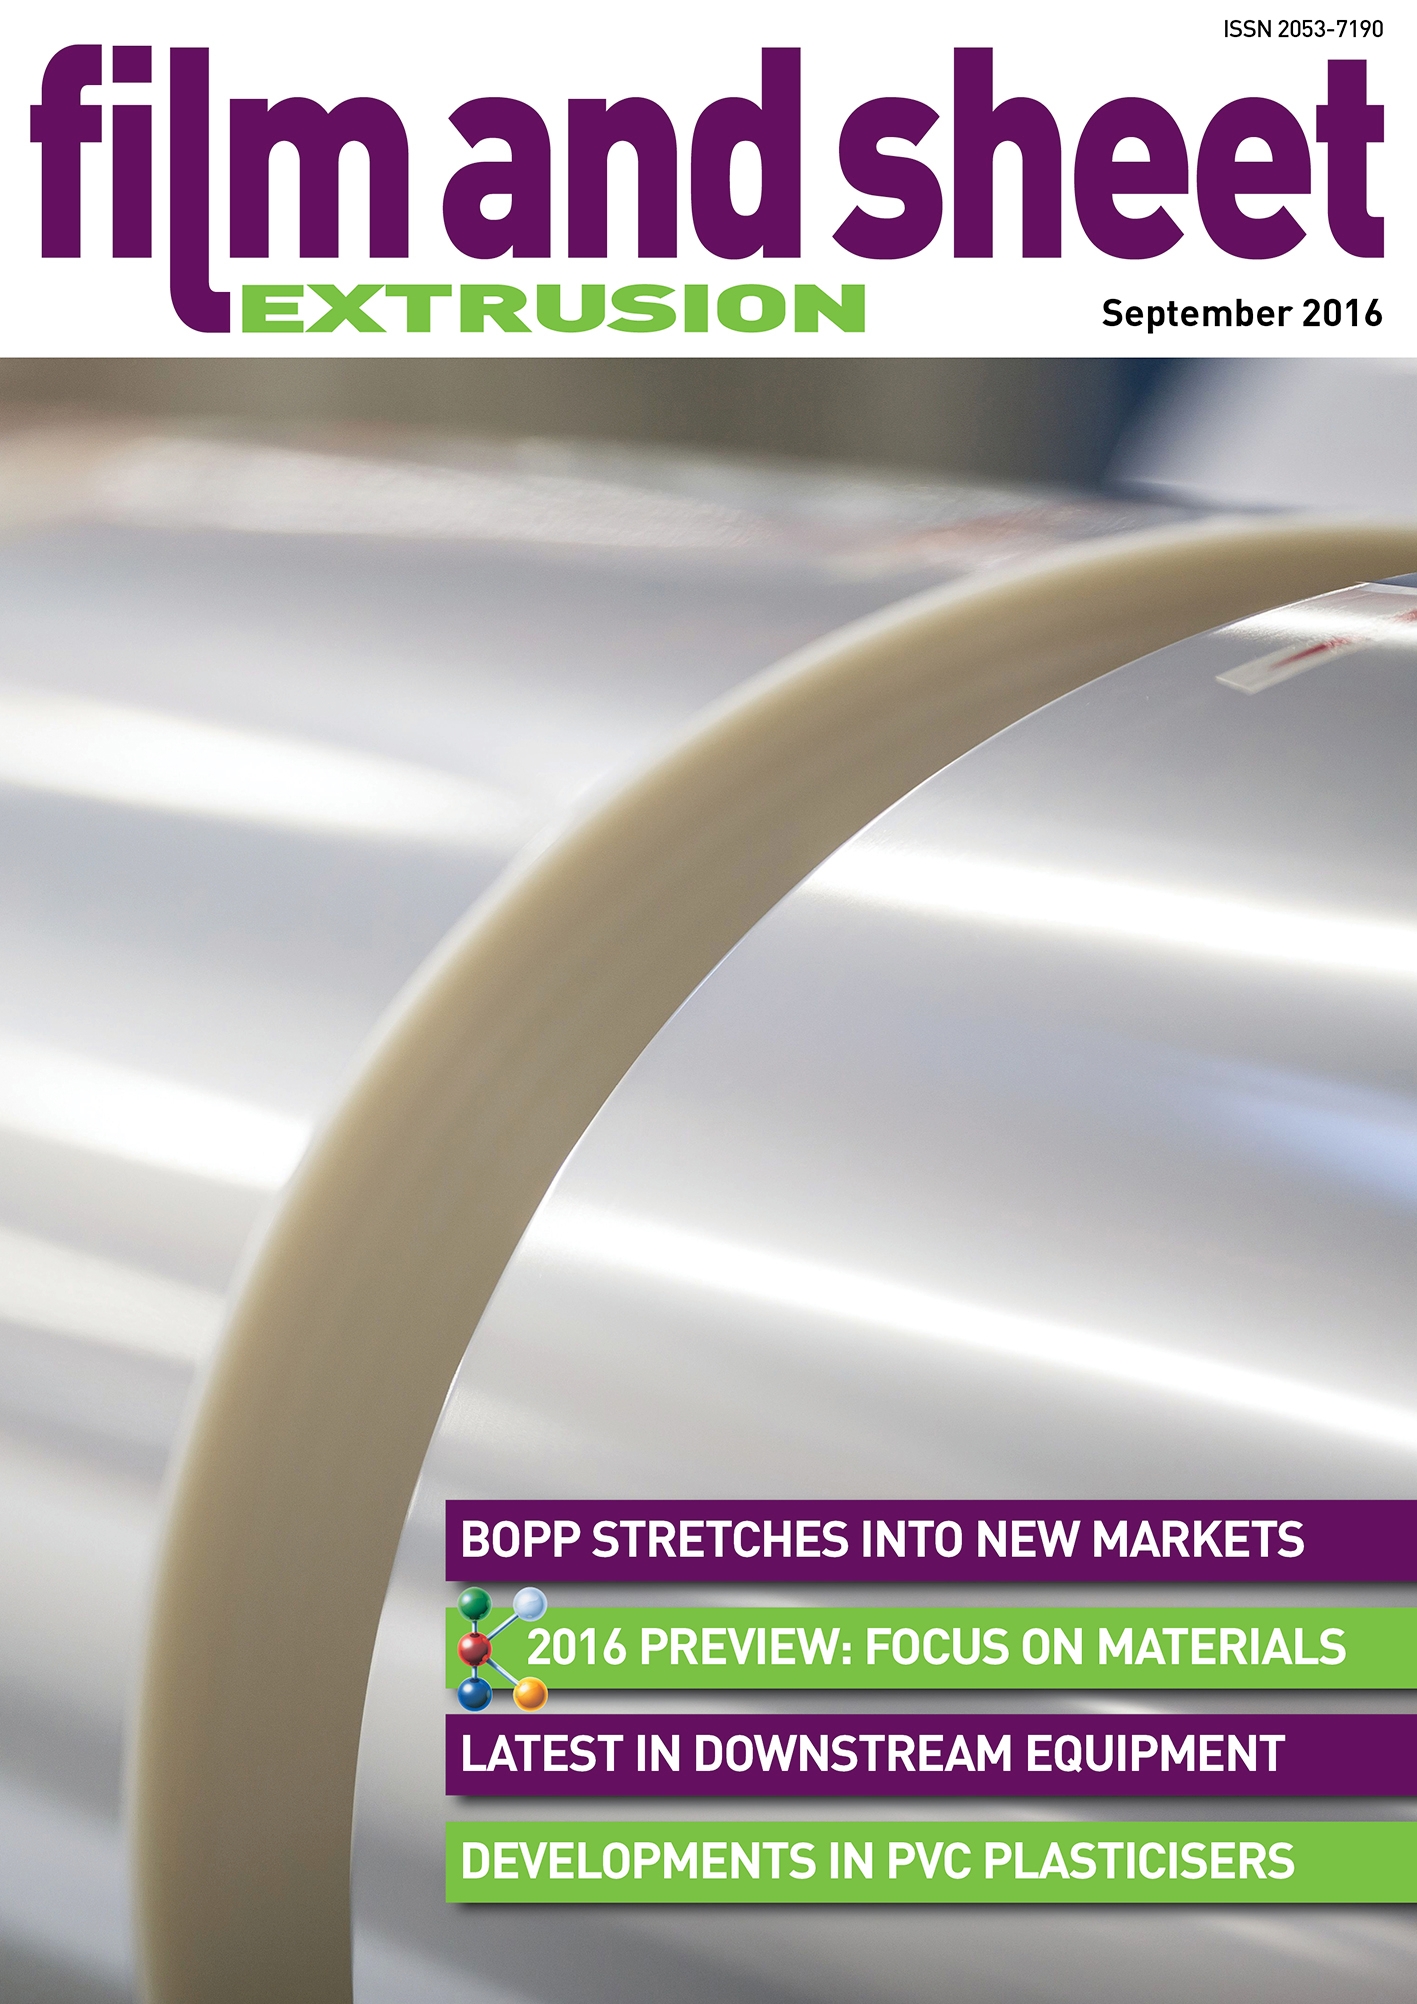 Film and Sheet Extrusion September 2016